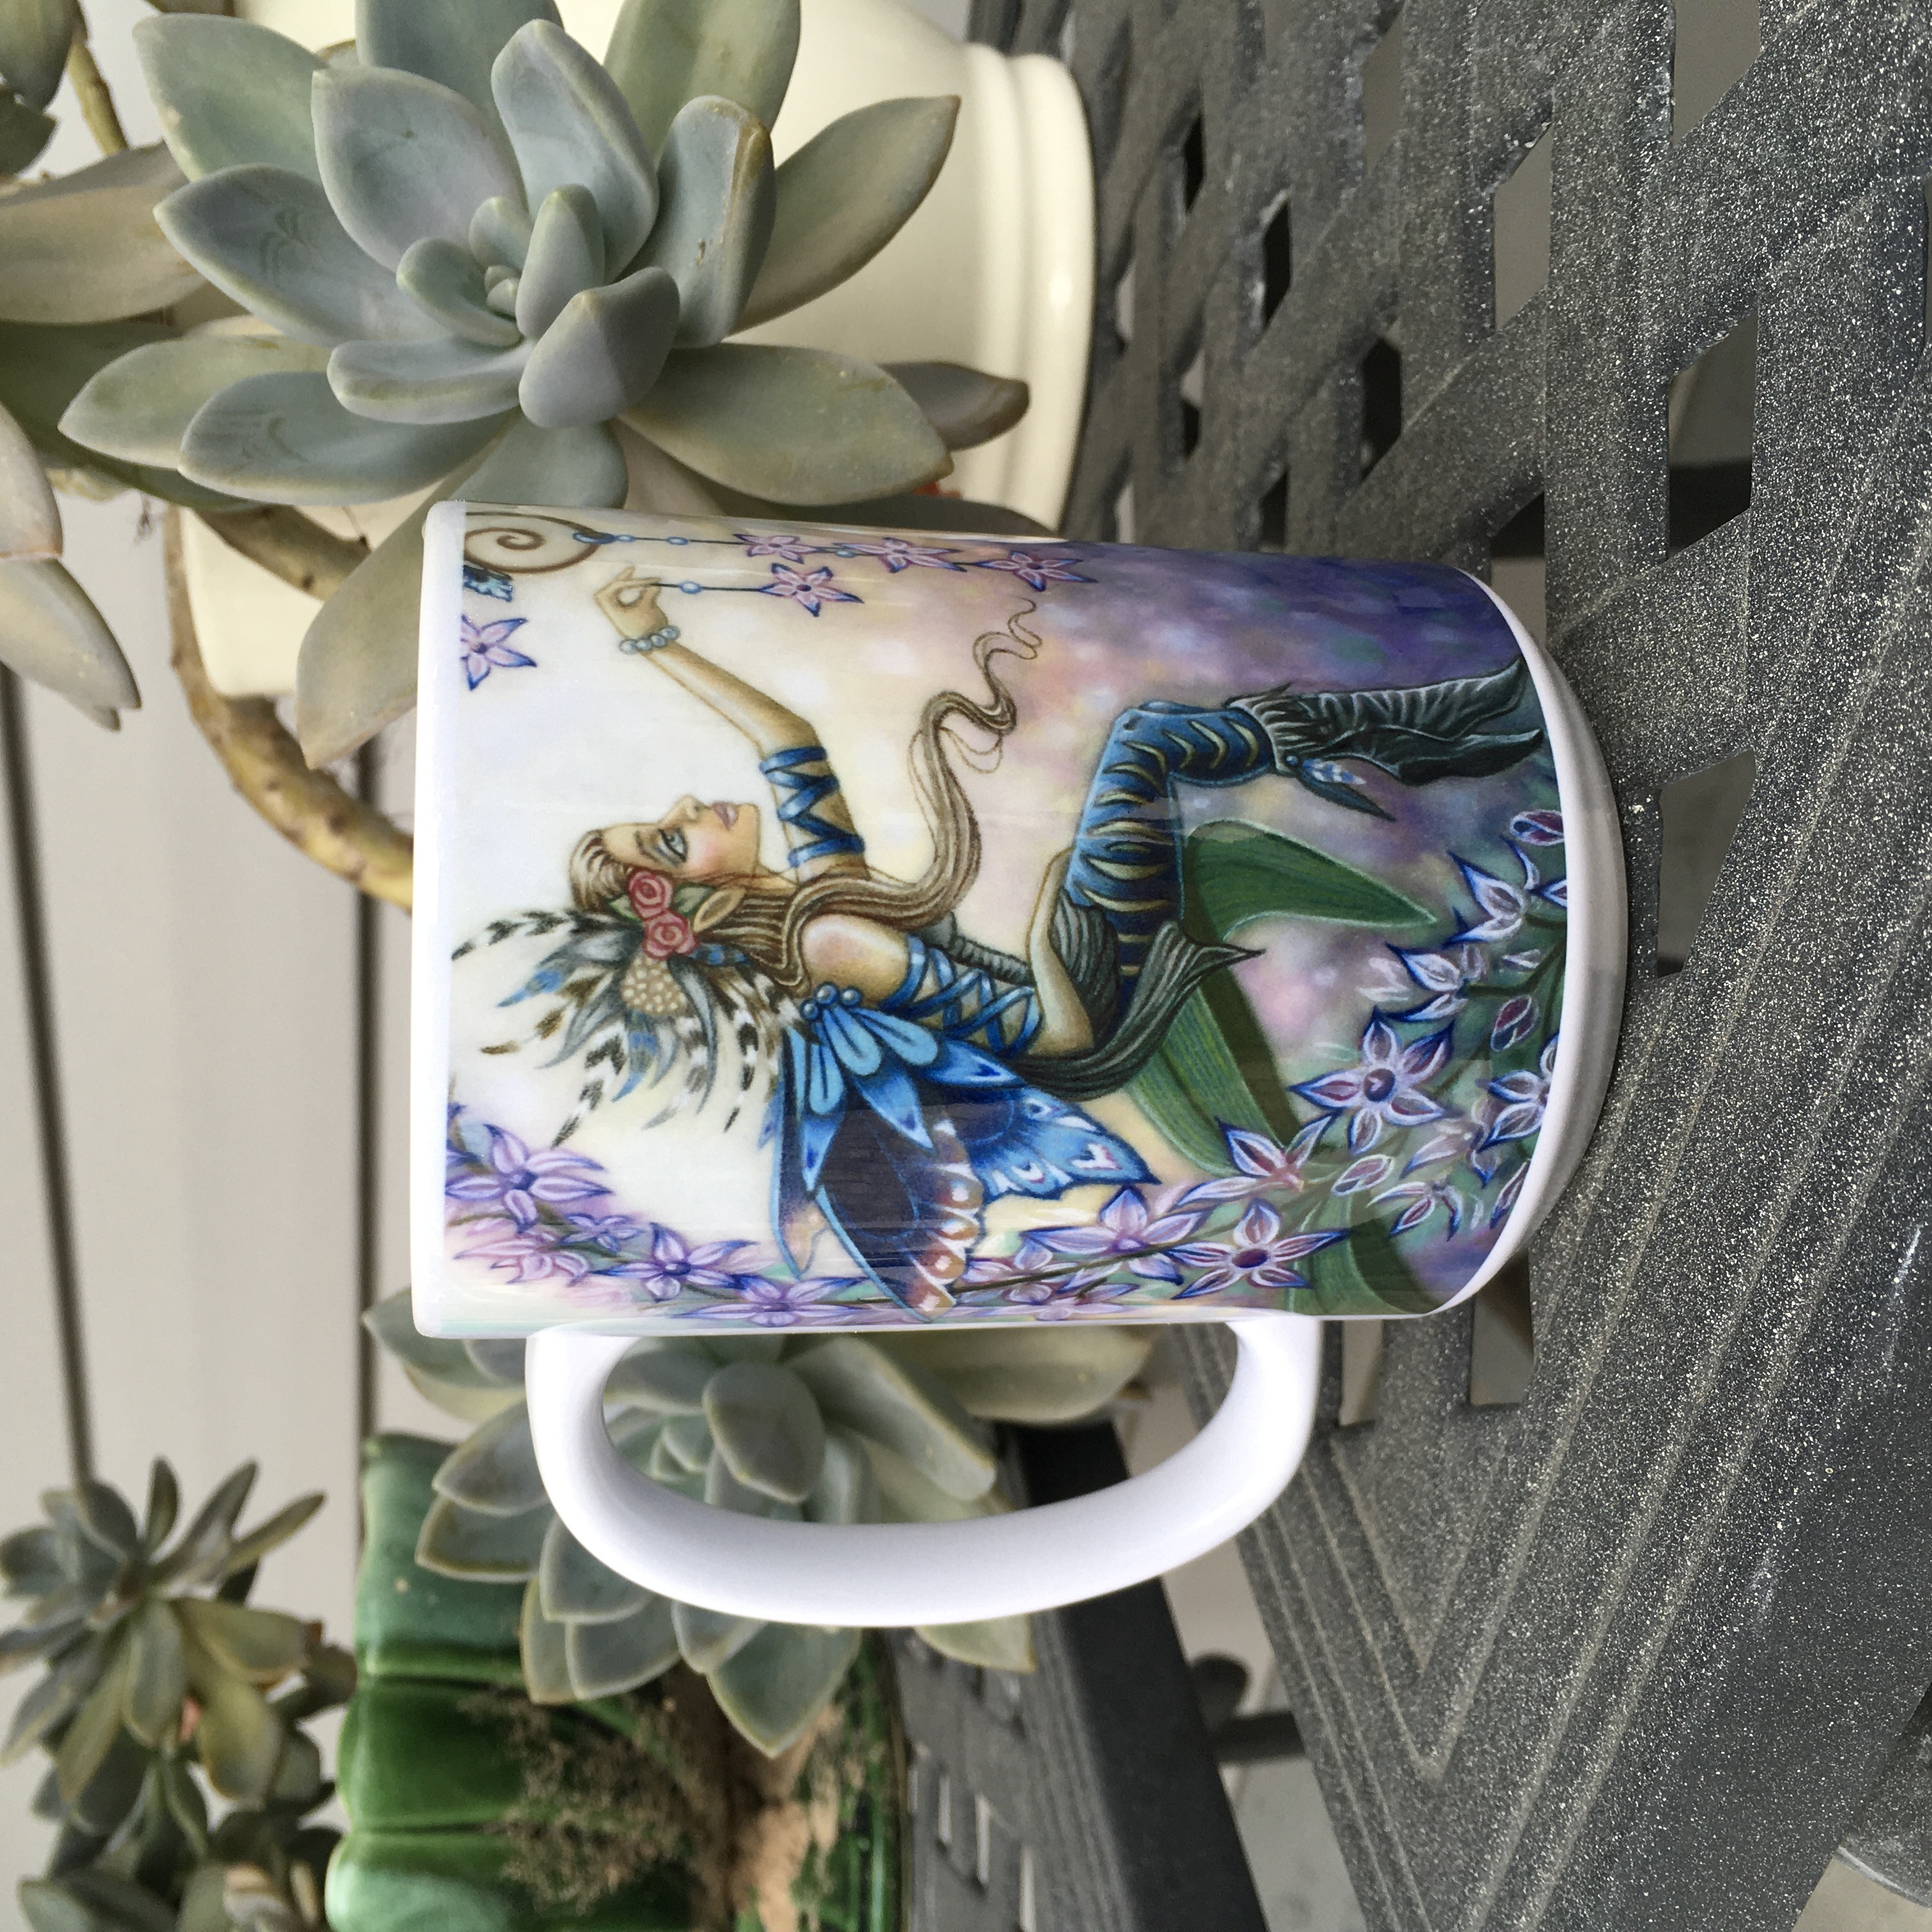 This coffee mug sublimated beautifully with my artwork. I love how the colors look pop. My fans